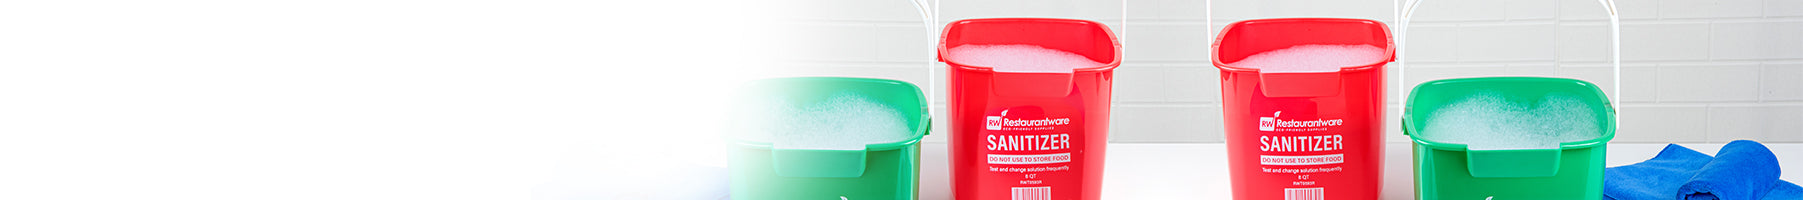 Banner_Janitorial_Cleaning-Tools_Buckets-Pails_350